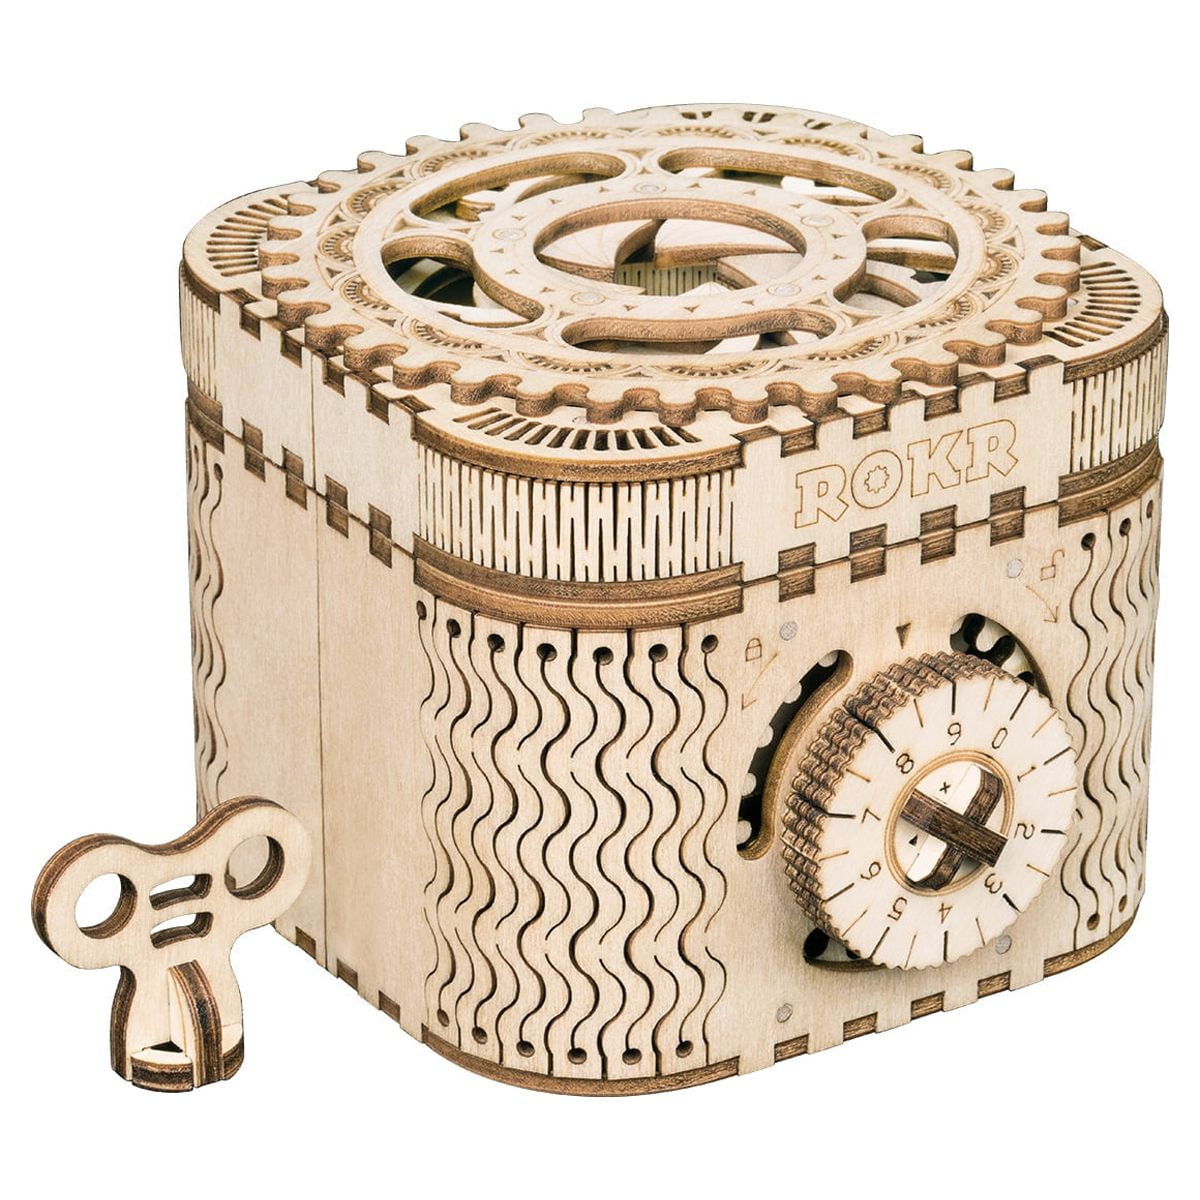 Unique 3d wooden puzzles kits, wooden models for adults, difficult 3d  puzzles for adults for sale - UGears Models